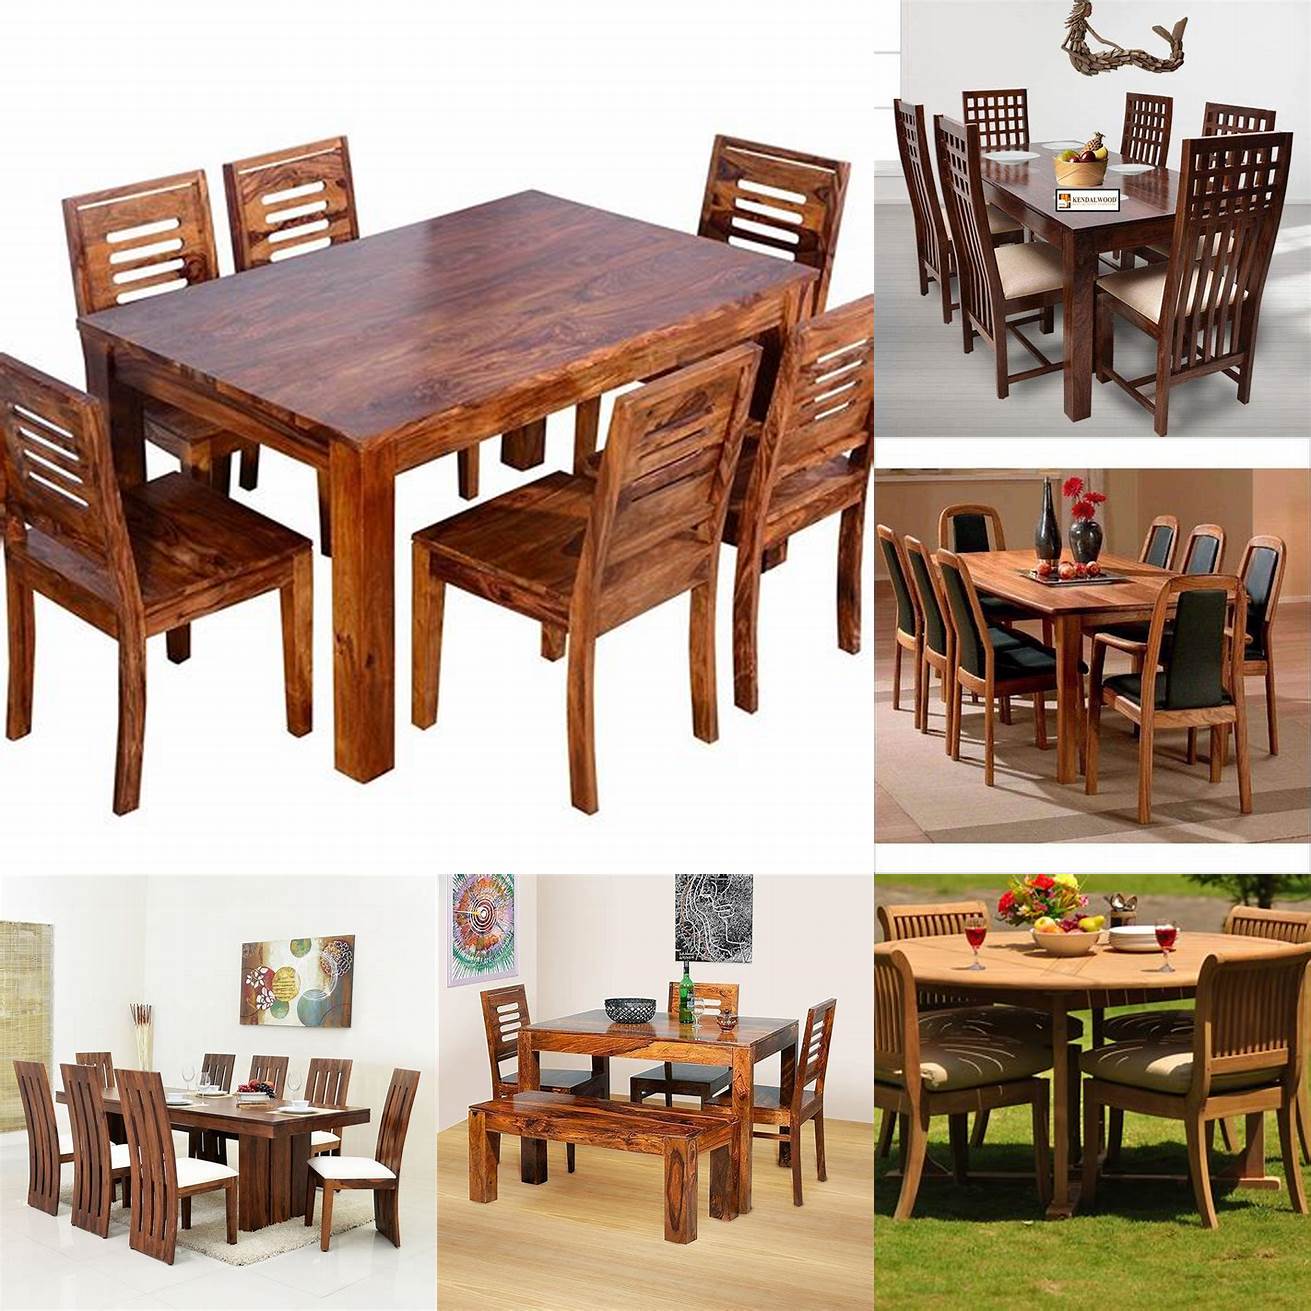 Teak wood dining table and chairs